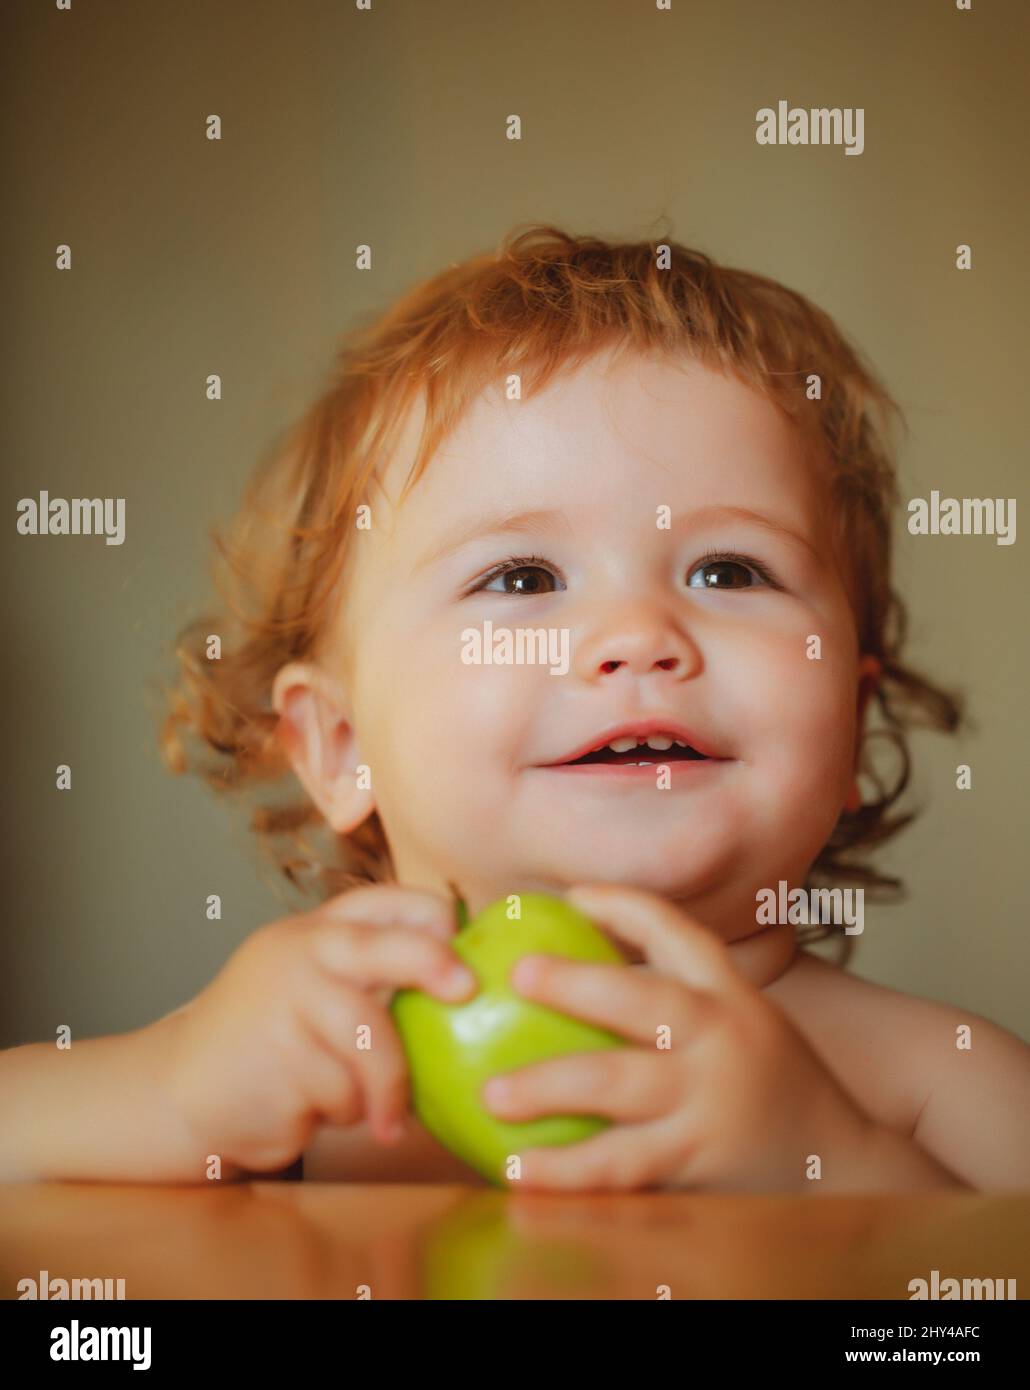 Launching child eat. Charming baby with apples. Little boy eating healthy food. Stock Photo